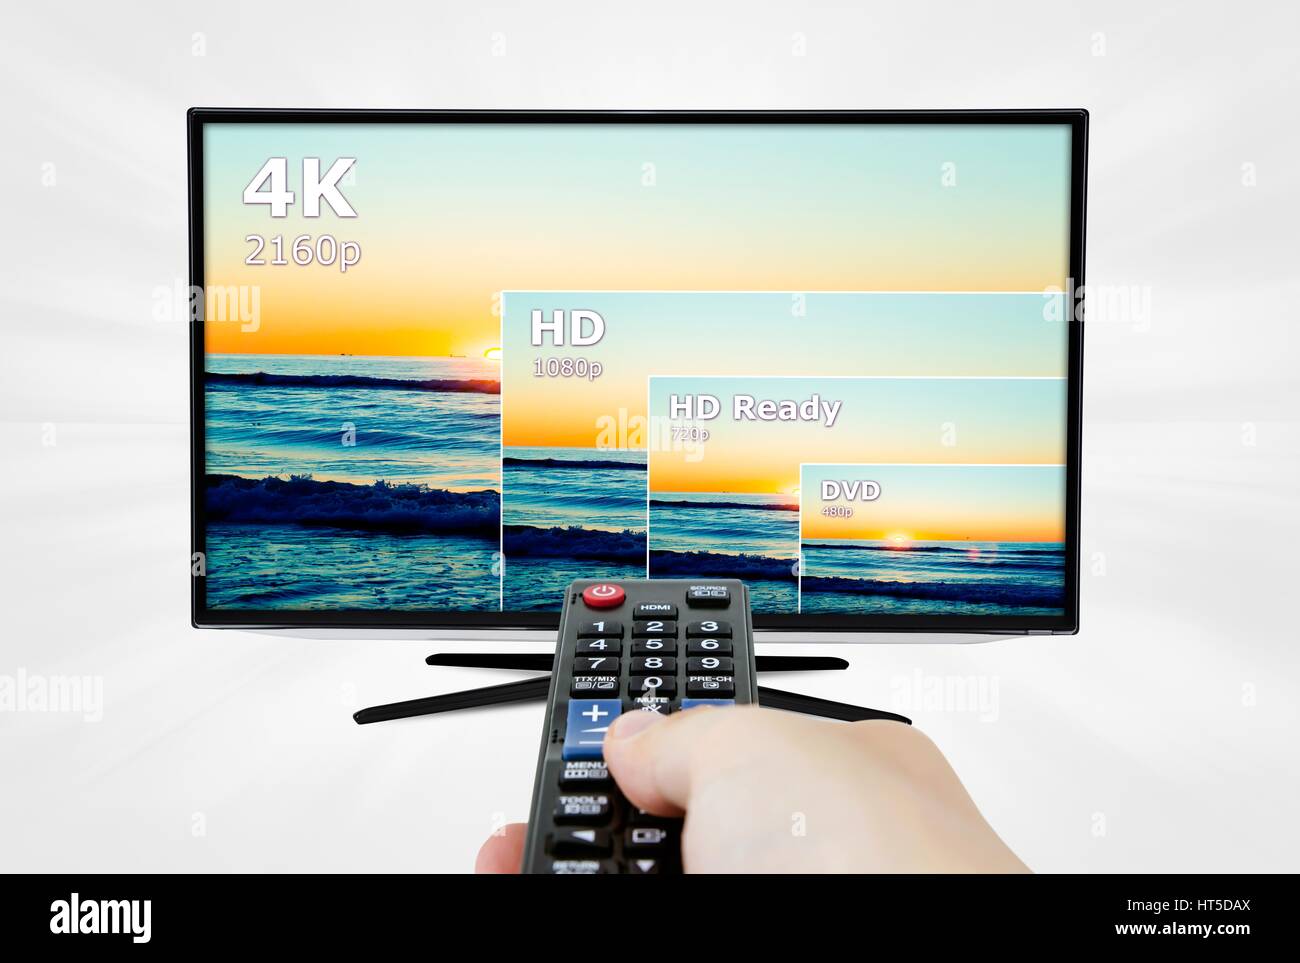 4K television display with comparison of resolutions. Remote control in hand Stock Photo